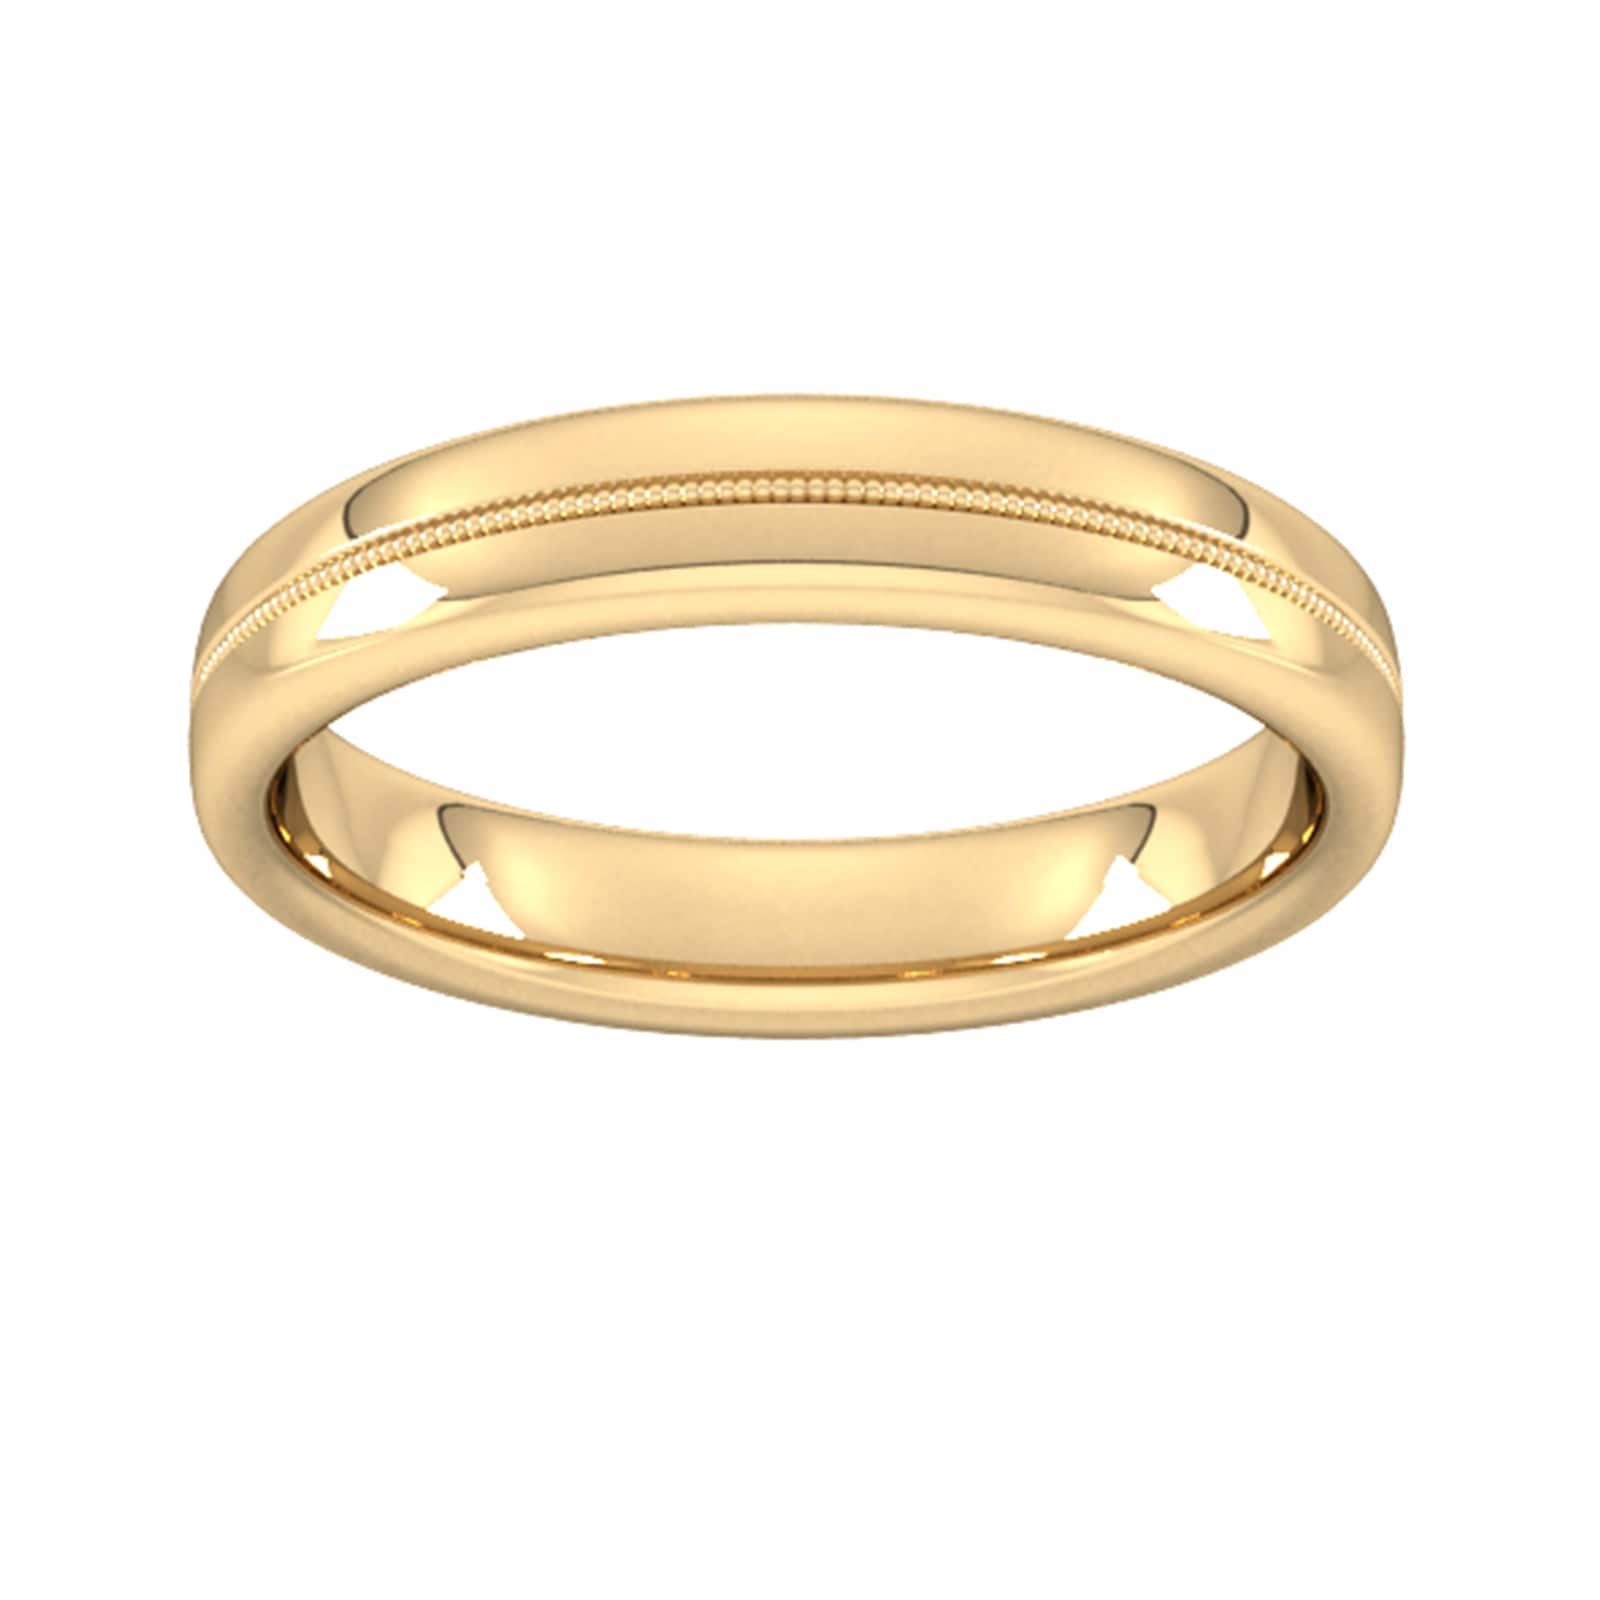 4mm Traditional Court Standard Milgrain Centre Wedding Ring In 18 Carat Yellow Gold - Ring Size L